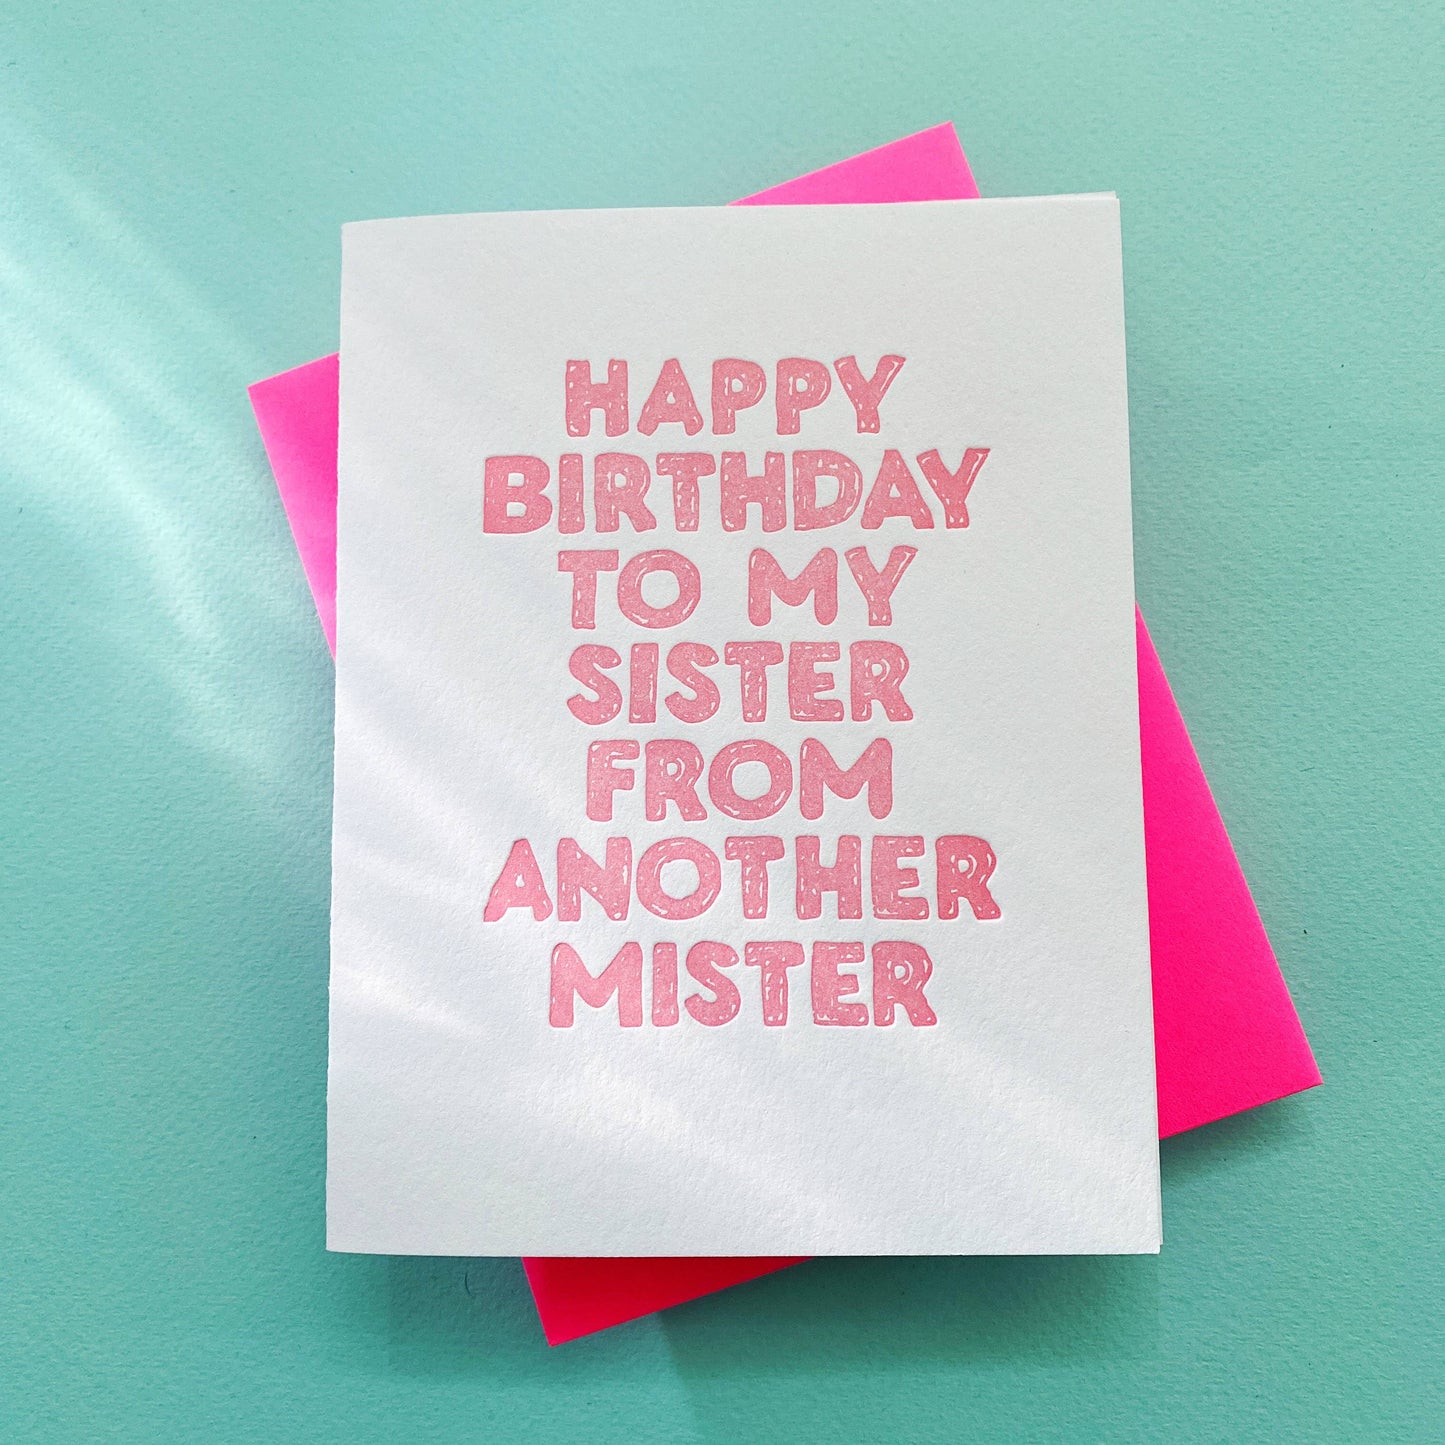 Happy Birthday Sister From Another Mister - soul sister bday